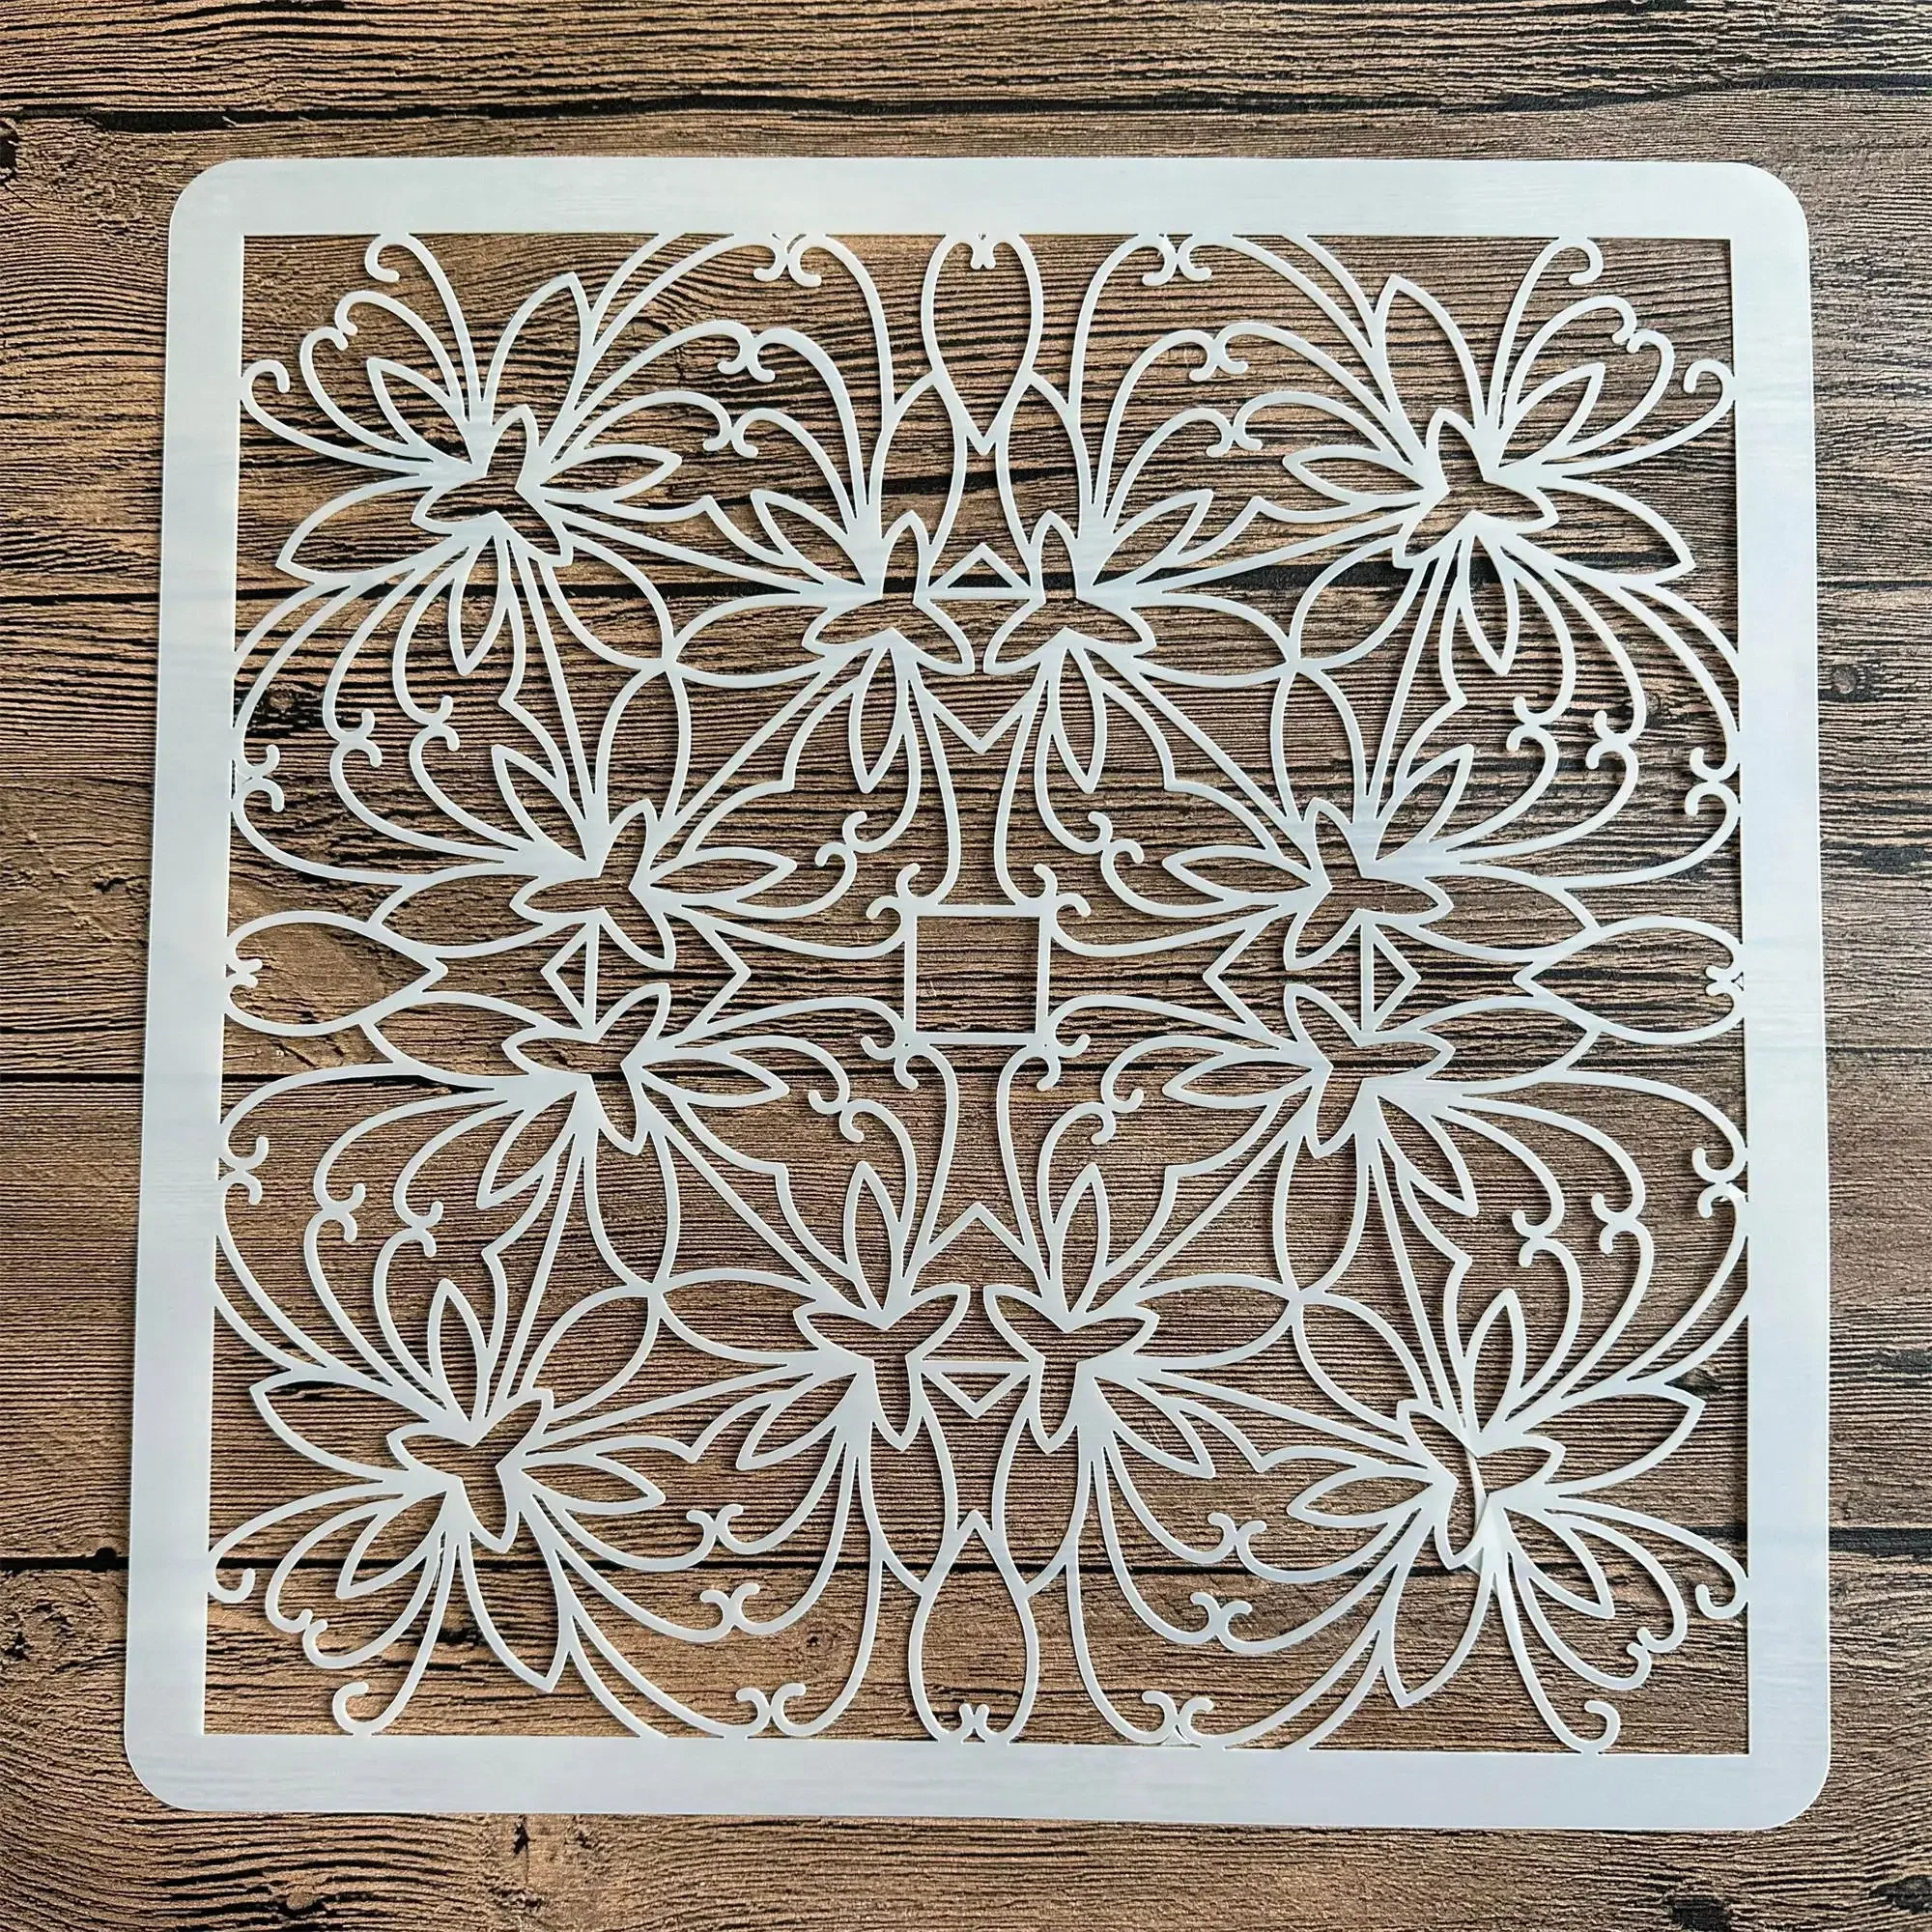 Mandala stencils diy mold for painting stencils stamped photo album embossed paper card on wood, fabric,wall 30 * 30cm size mandala stencils diy mold for painting stencils stamped photo album embossed paper card on wood fabric wall 30 30cm size